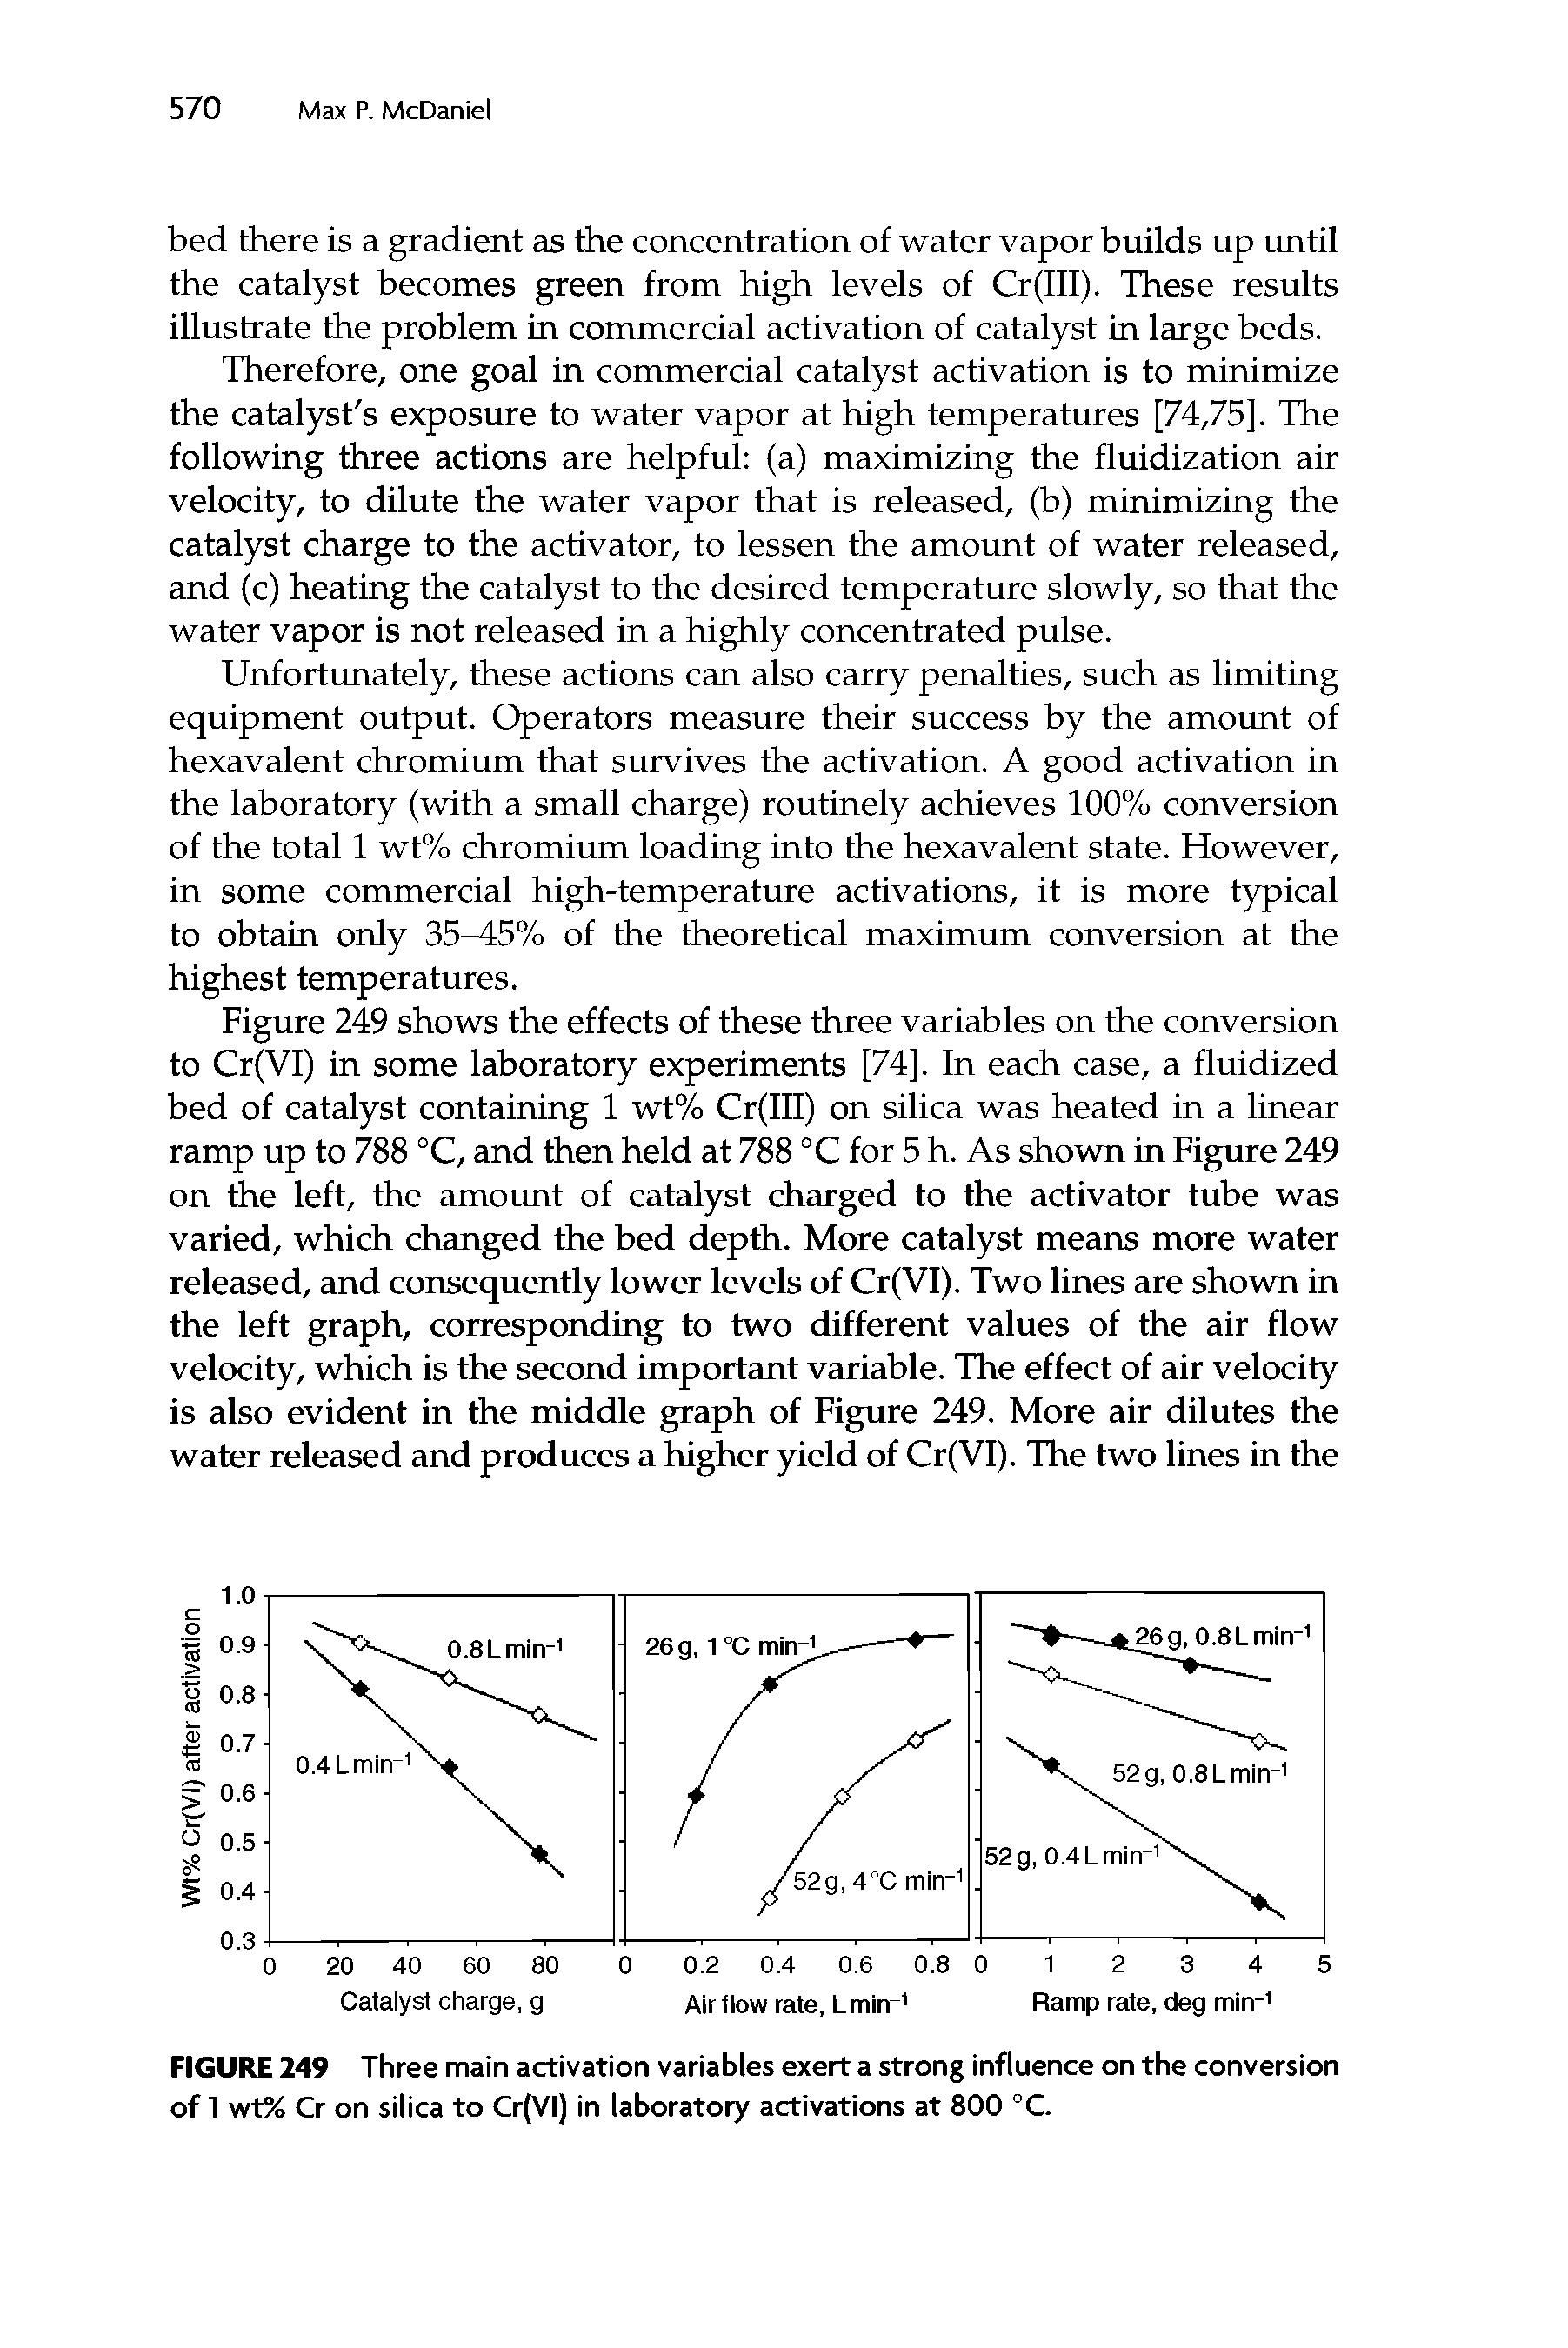 Figure 249 shows the effects of these three variables on the conversion to Cr(VI) in some laboratory experiments [74], In each case, a fluidized bed of catalyst containing 1 wt% Cr(III) on silica was heated in a linear ramp up to 788 °C, and then held at 788 °C for 5 h. As shown in Figure 249 on the left, the amount of catalyst charged to the activator tube was varied, which changed the bed depth. More catalyst means more water released, and consequently lower levels of Cr(VI). Two lines are shown in the left graph, corresponding to two different values of the air flow velocity, which is the second important variable. The effect of air velocity is also evident in the middle graph of Figure 249. More air dilutes the water released and produces a higher yield of Cr(VI). The two lines in the...